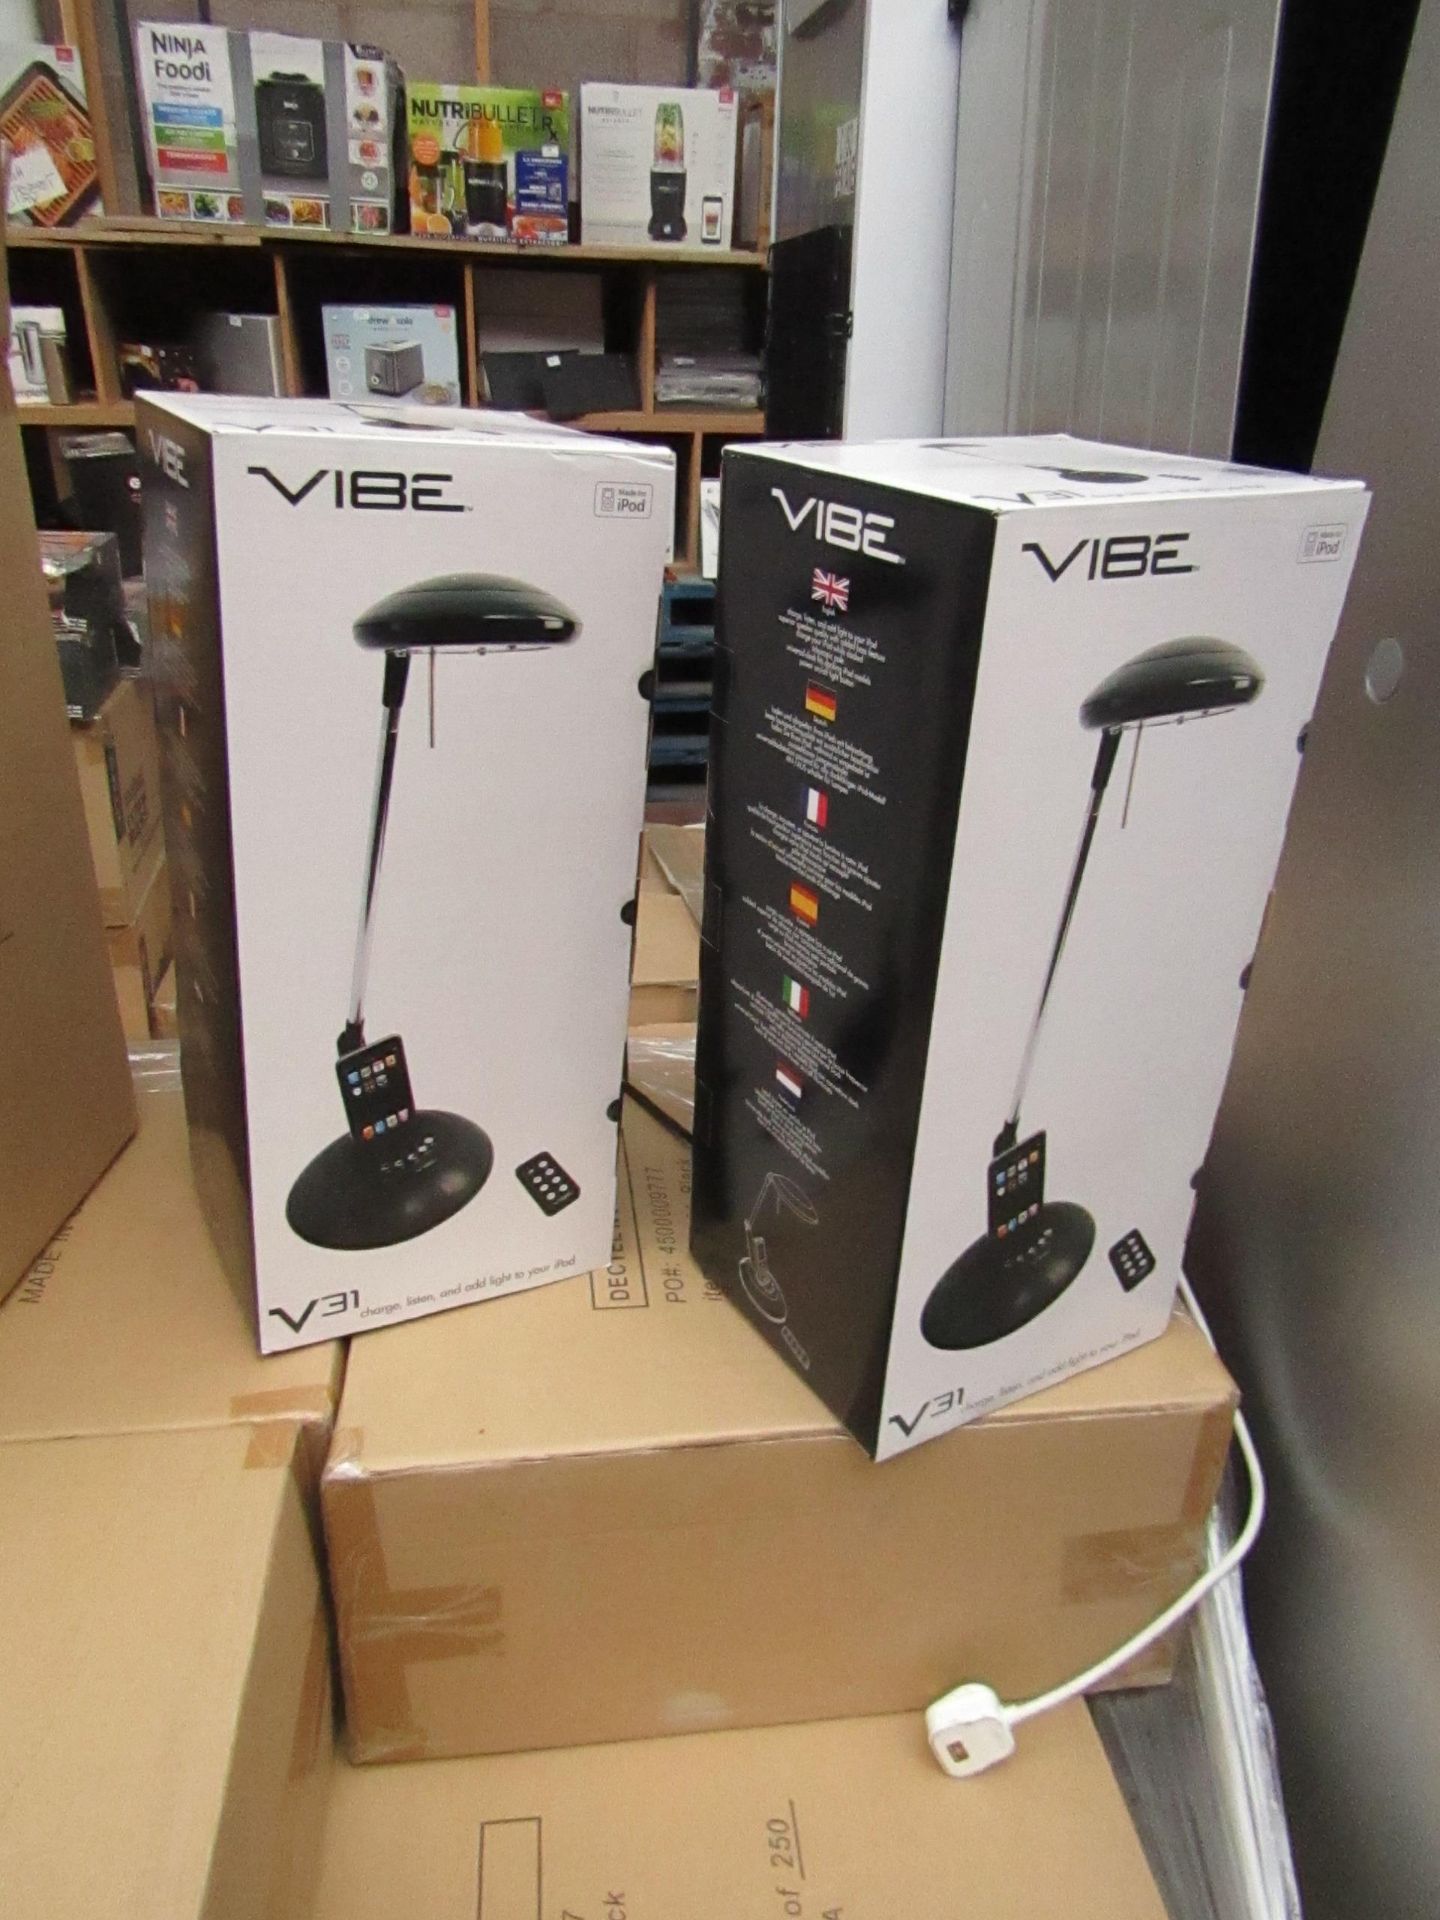 Vibe VE1 iPod music station with lamp, new and boxed.